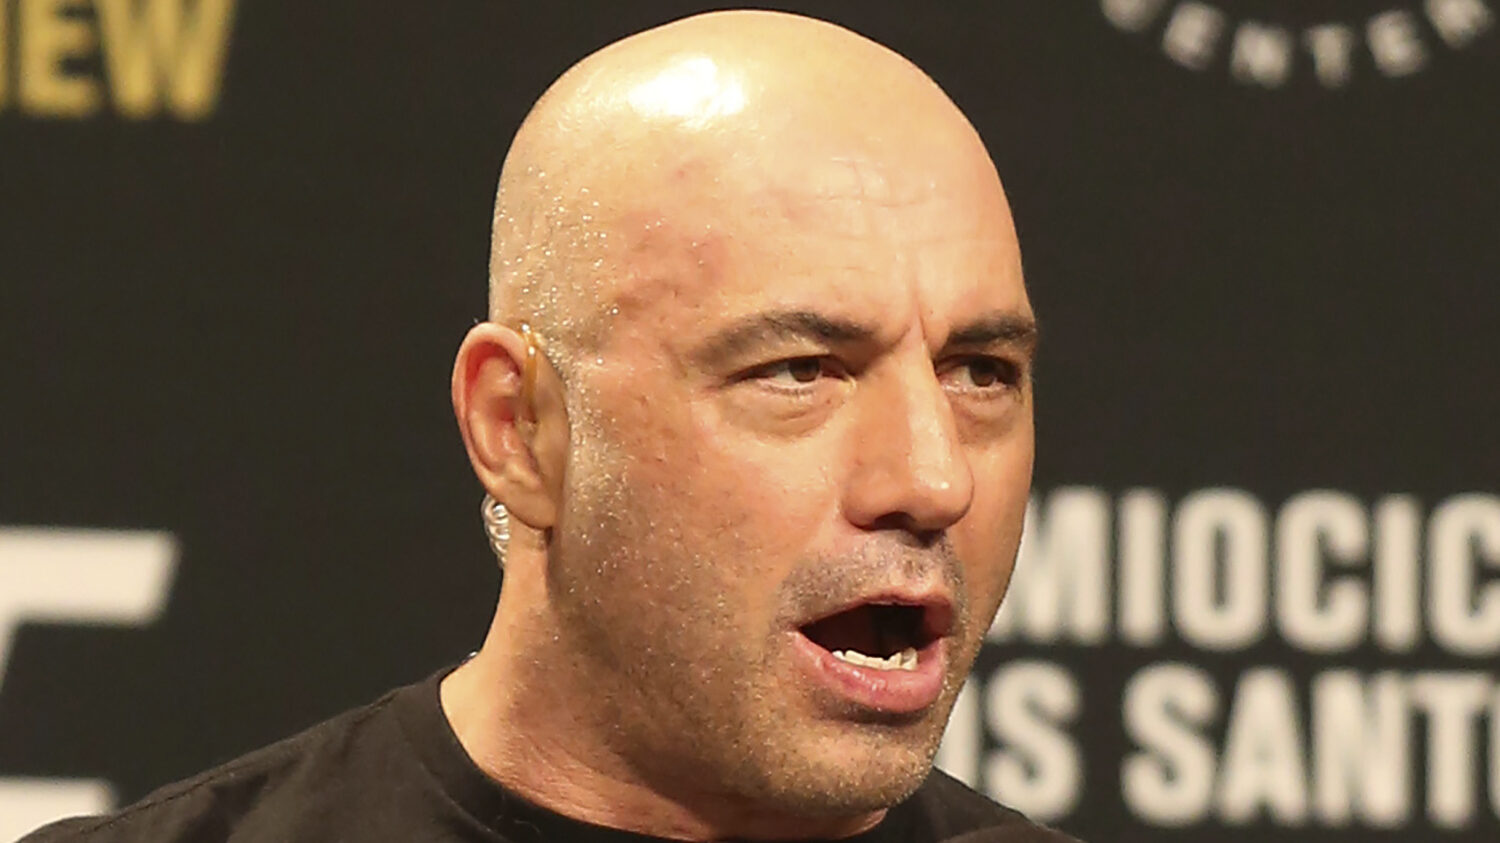 FILE - Joe Rogan is seen during a weigh-in before UFC 211 on Friday, May 12, 2017, in Dallas. Spoti...